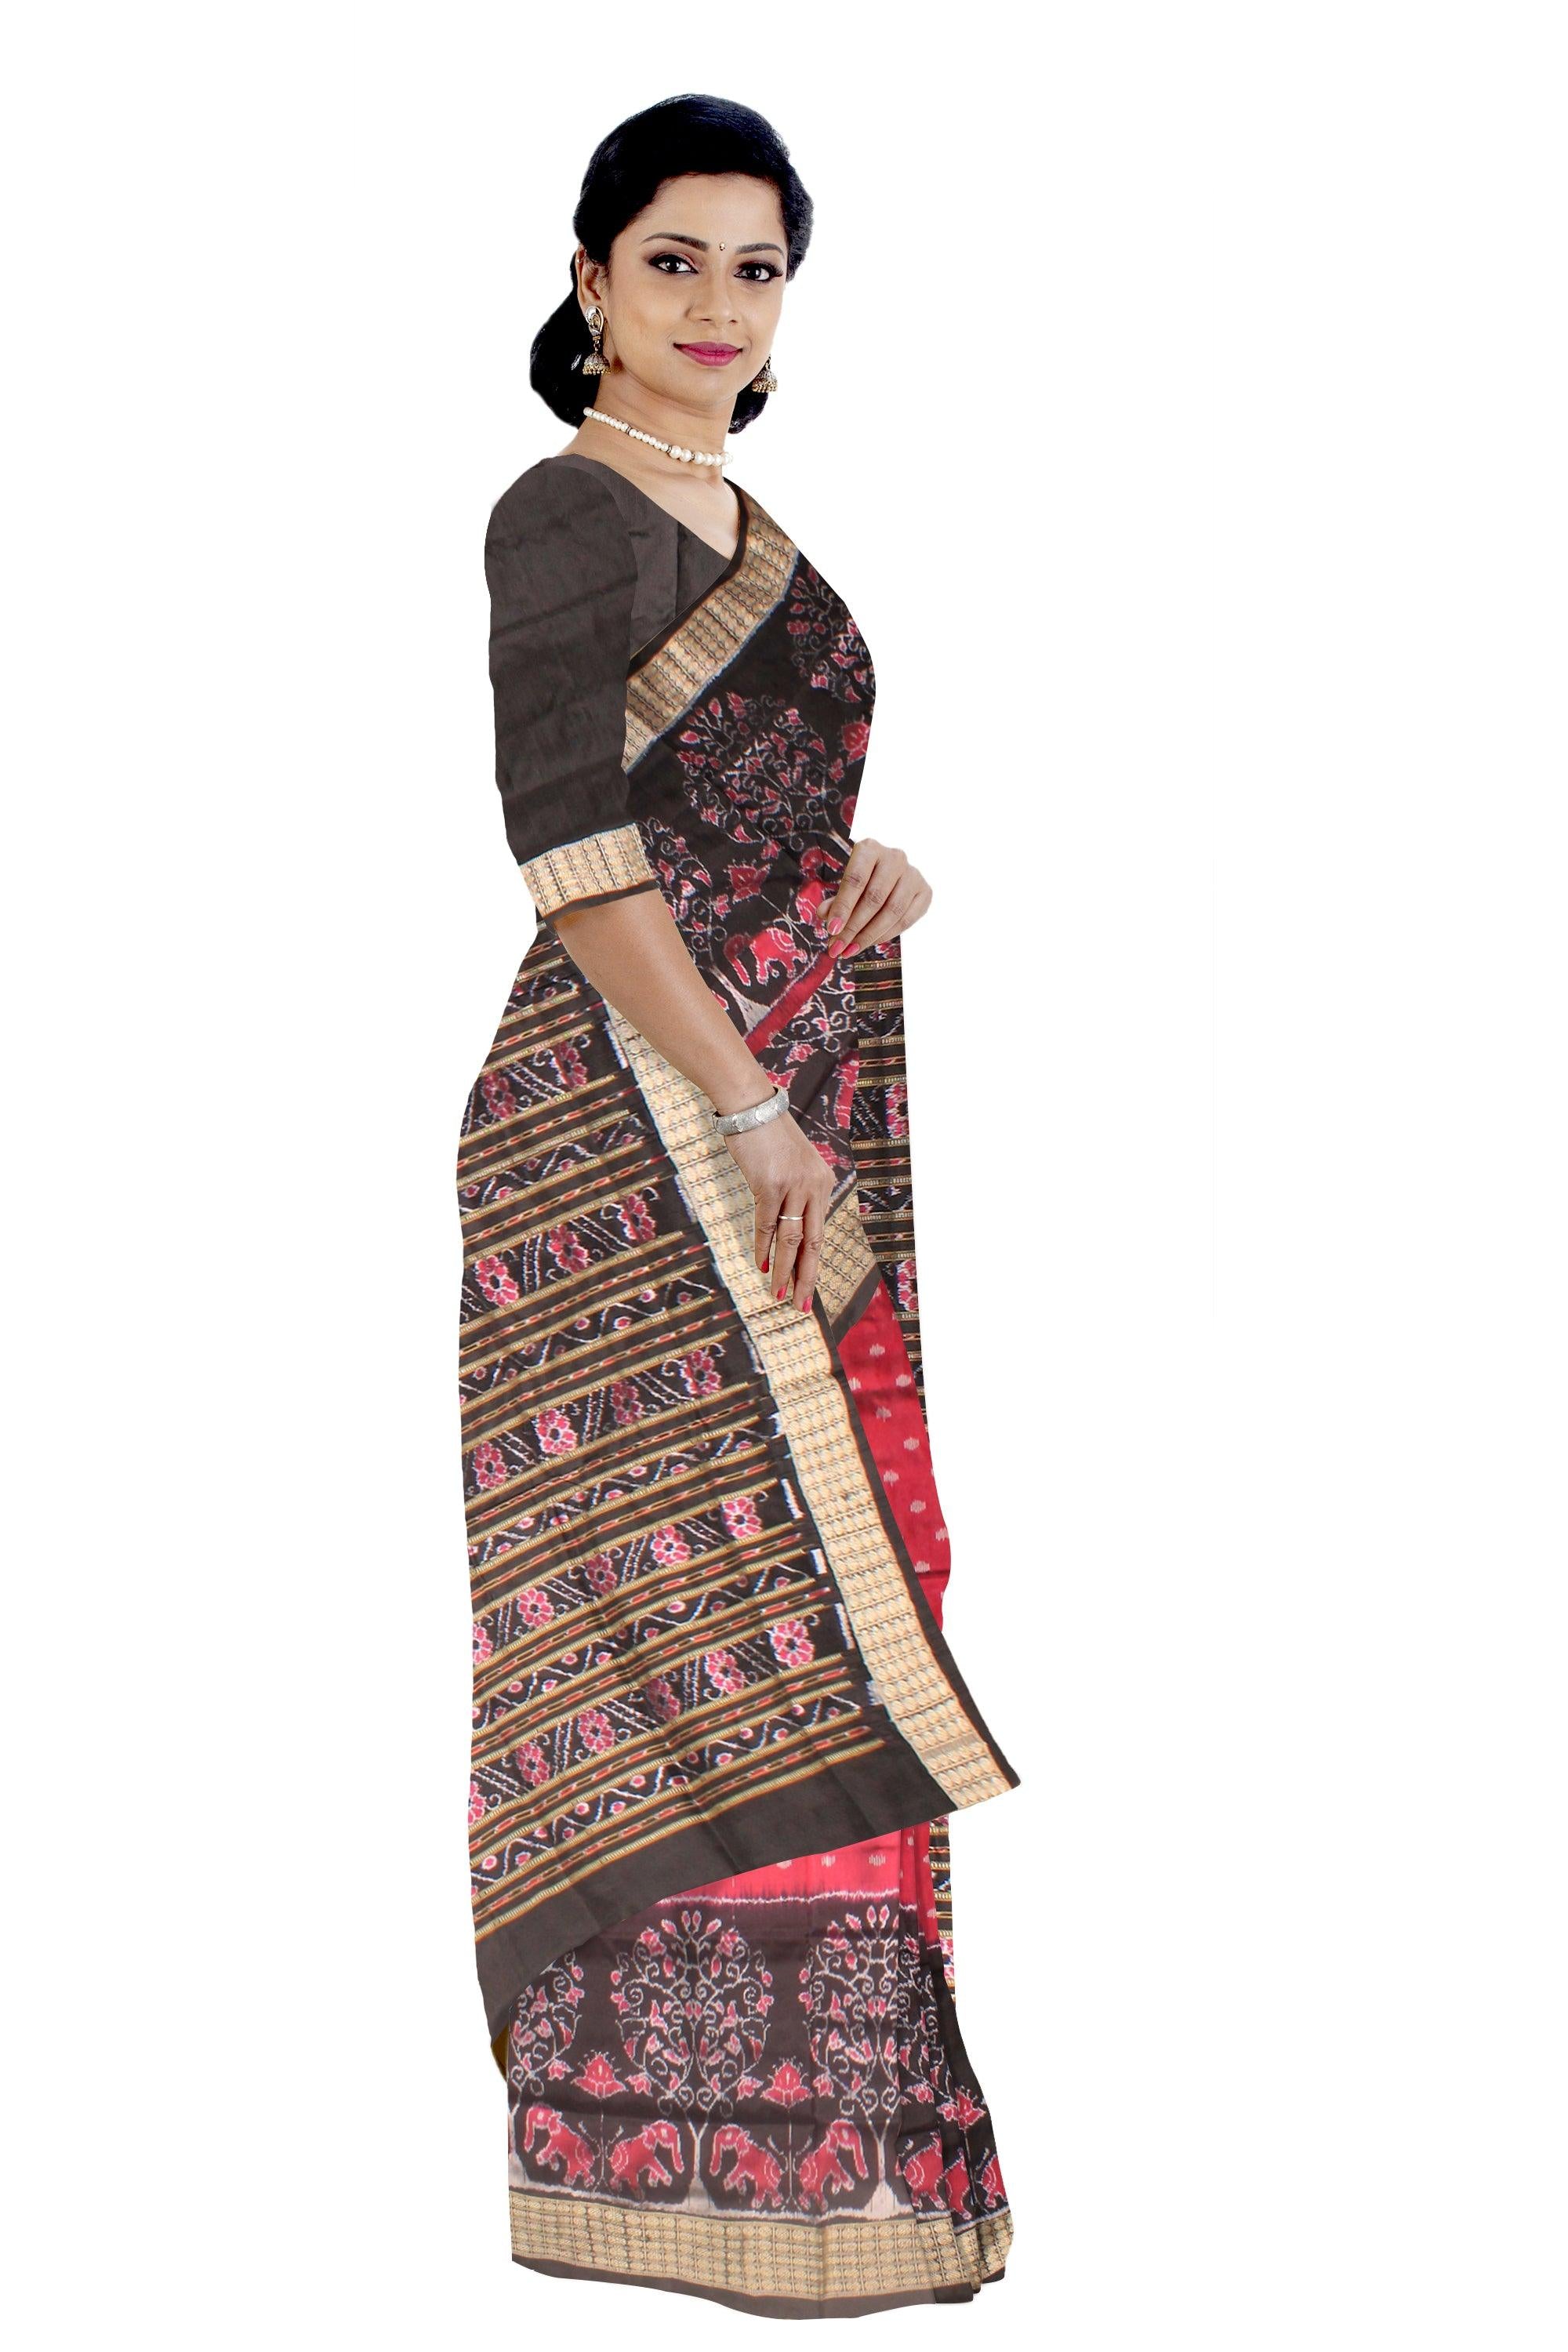 New Design Pink and Black color with tree and Elephant in the border pata saree with blouse piece - Koshali Arts & Crafts Enterprise